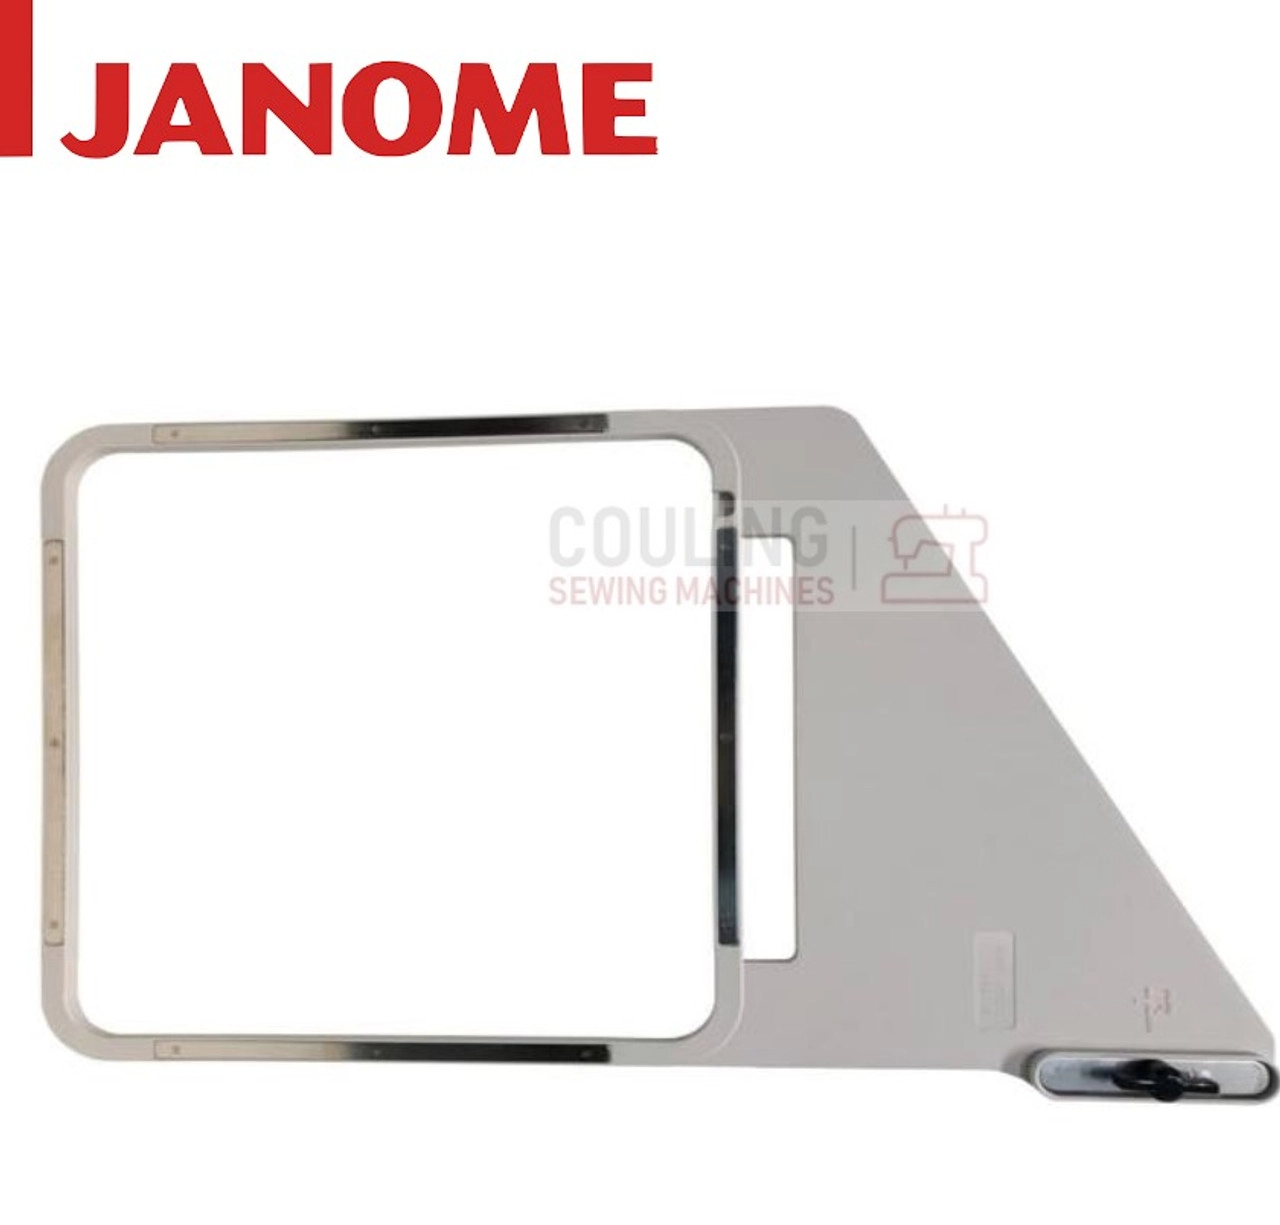 Janome Embroidery Hoop (ASQ22) 220 X 220 mm